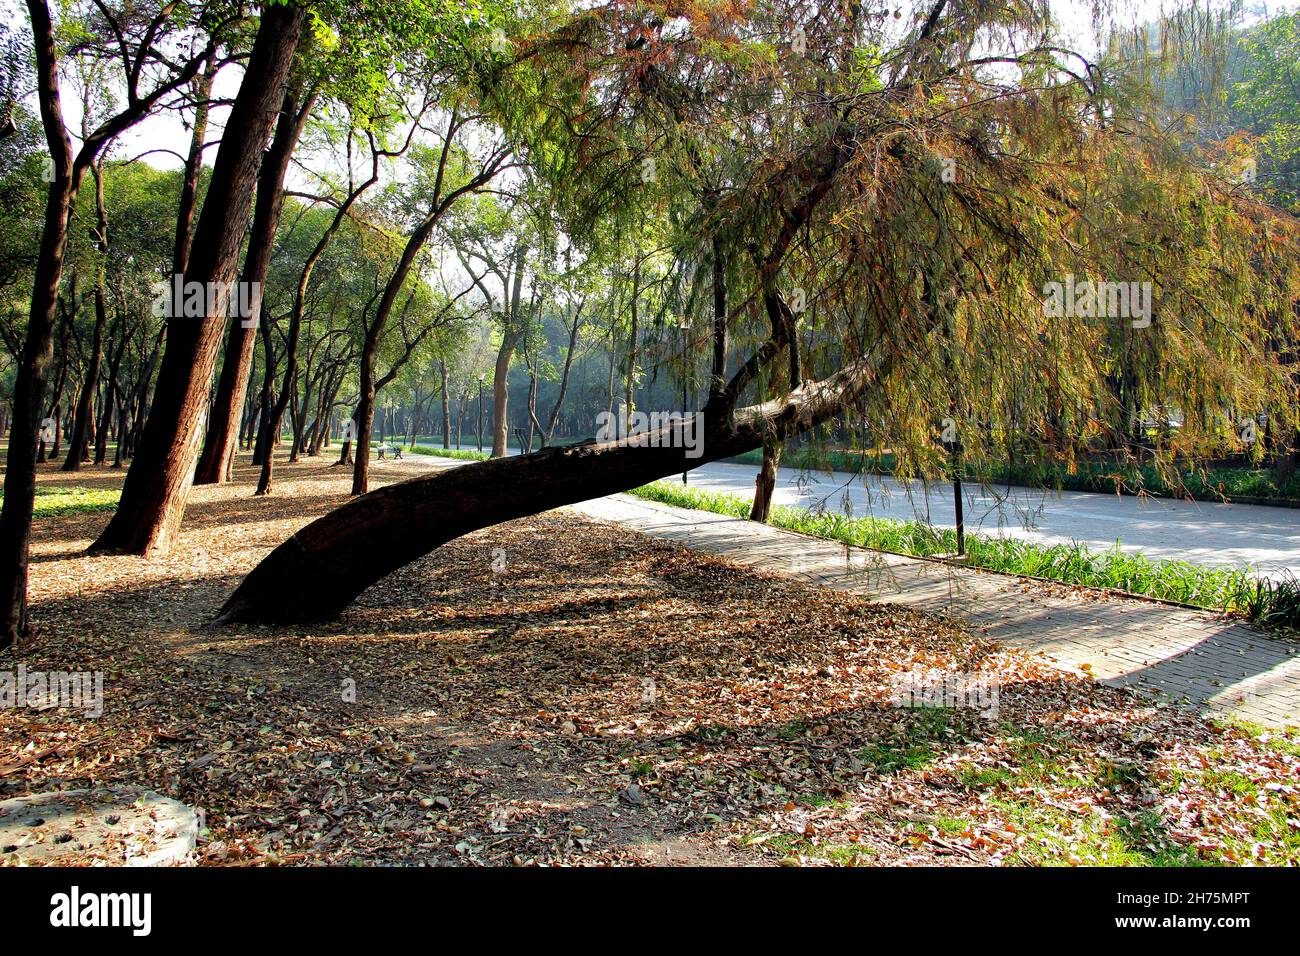 Tropical trees in the Chapultepec forest in Mexico city. Stock Photo